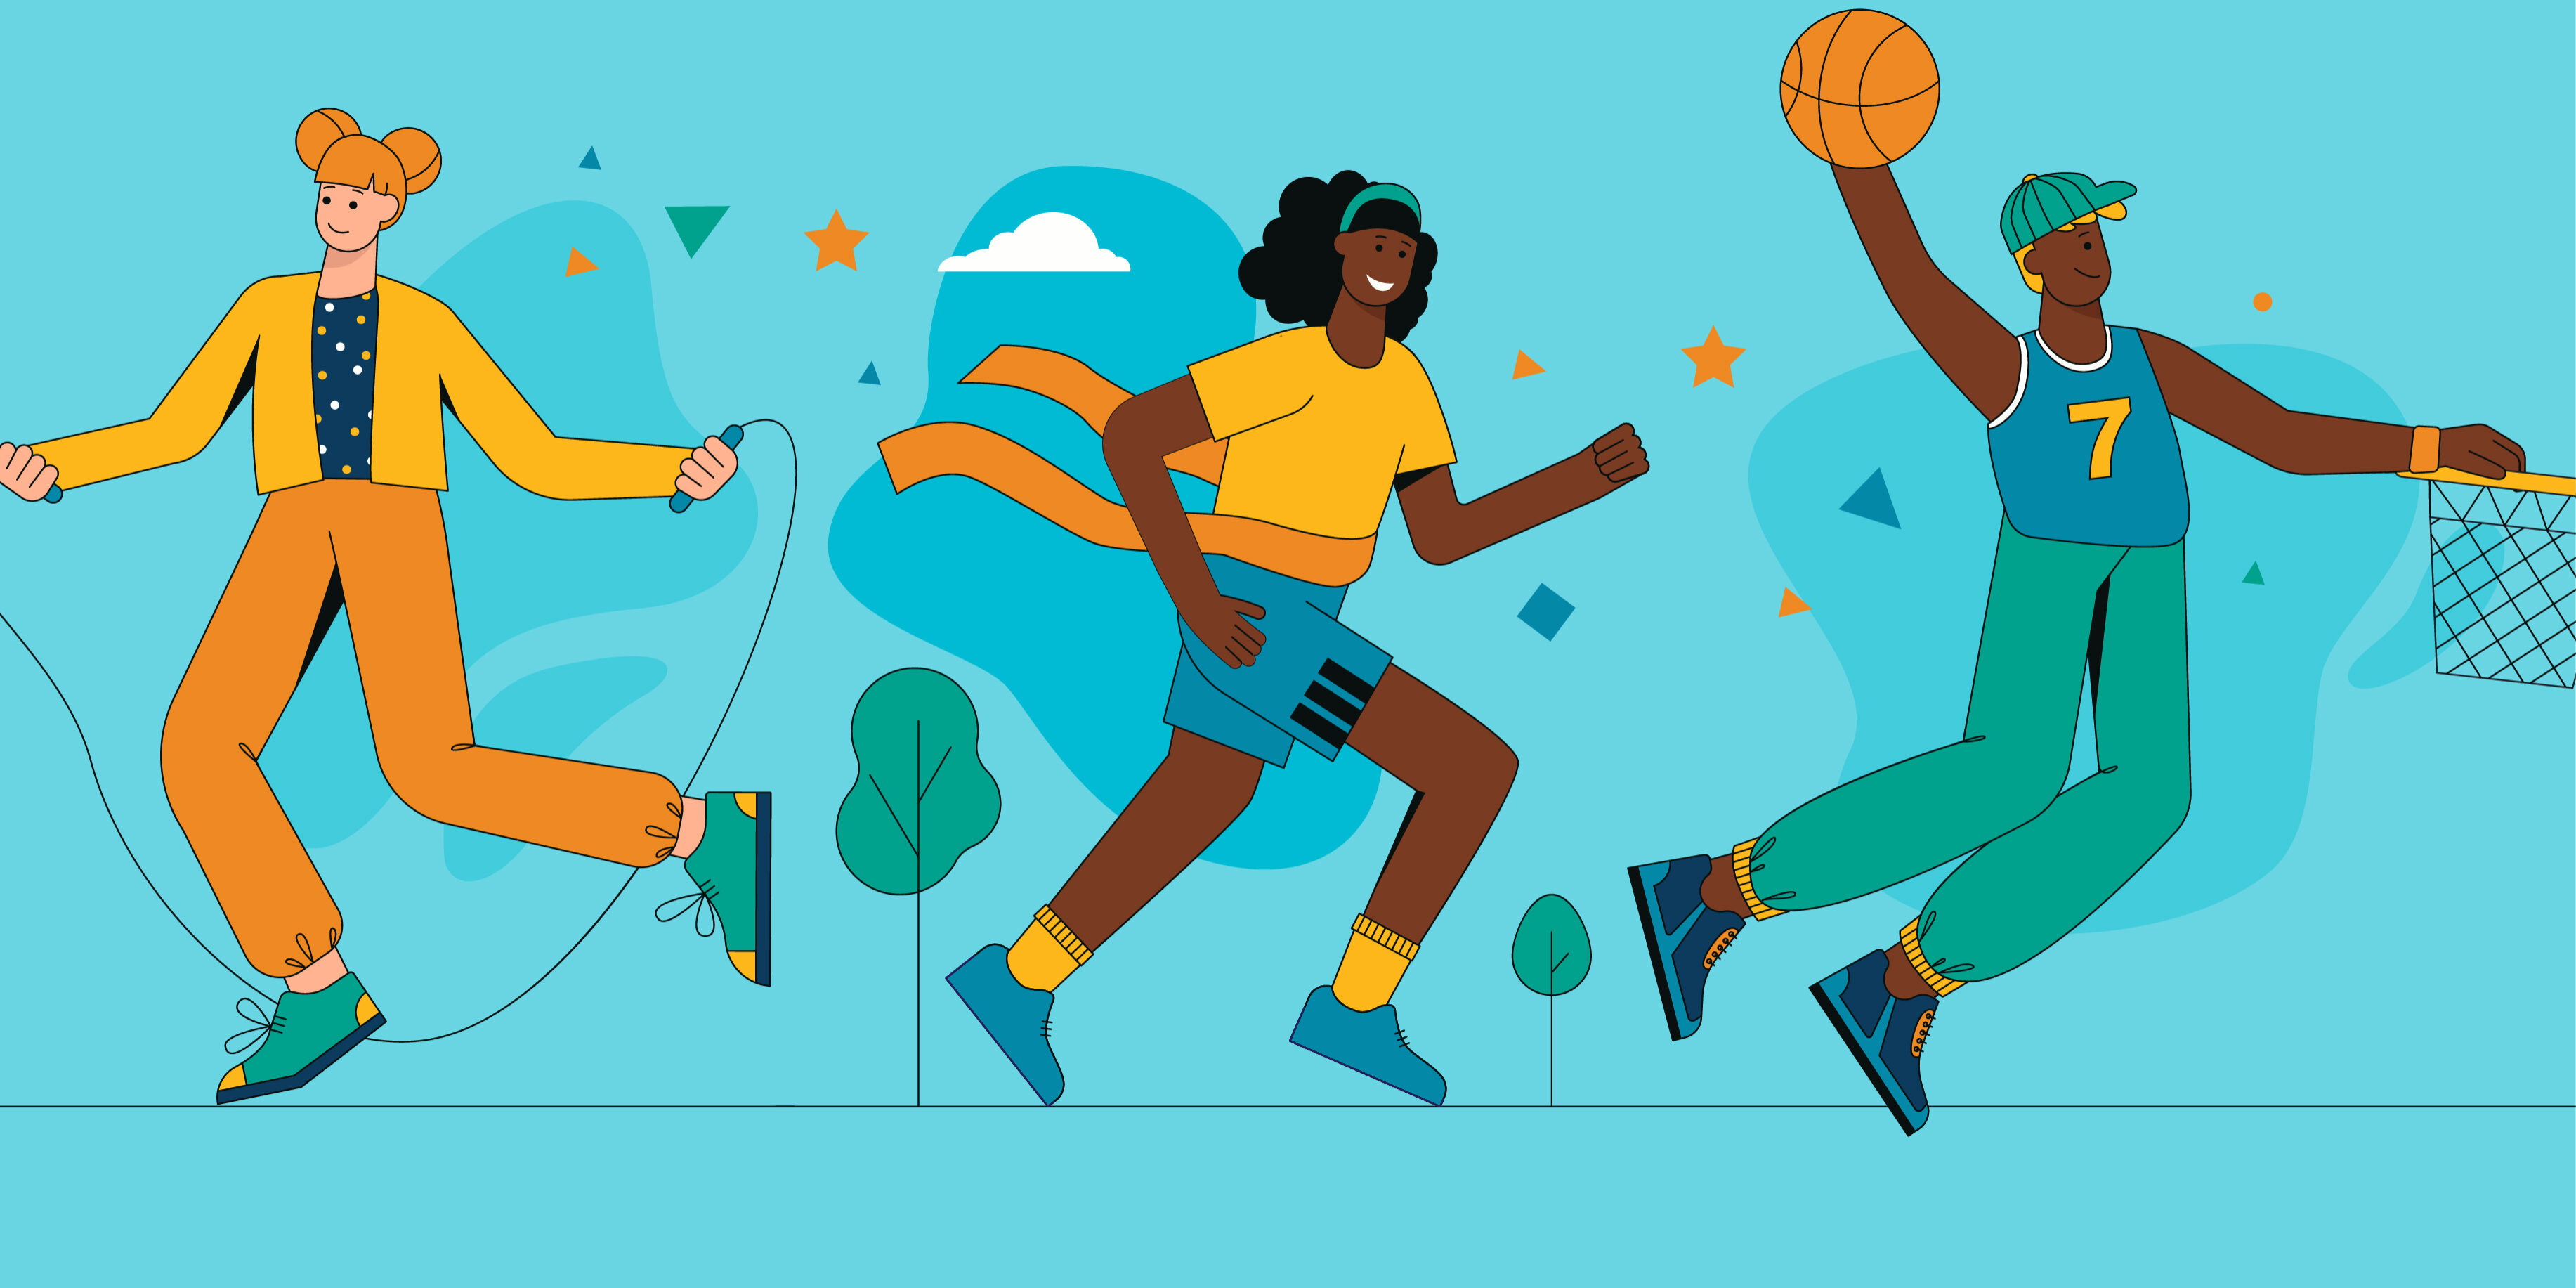 Illustration of people playing sports